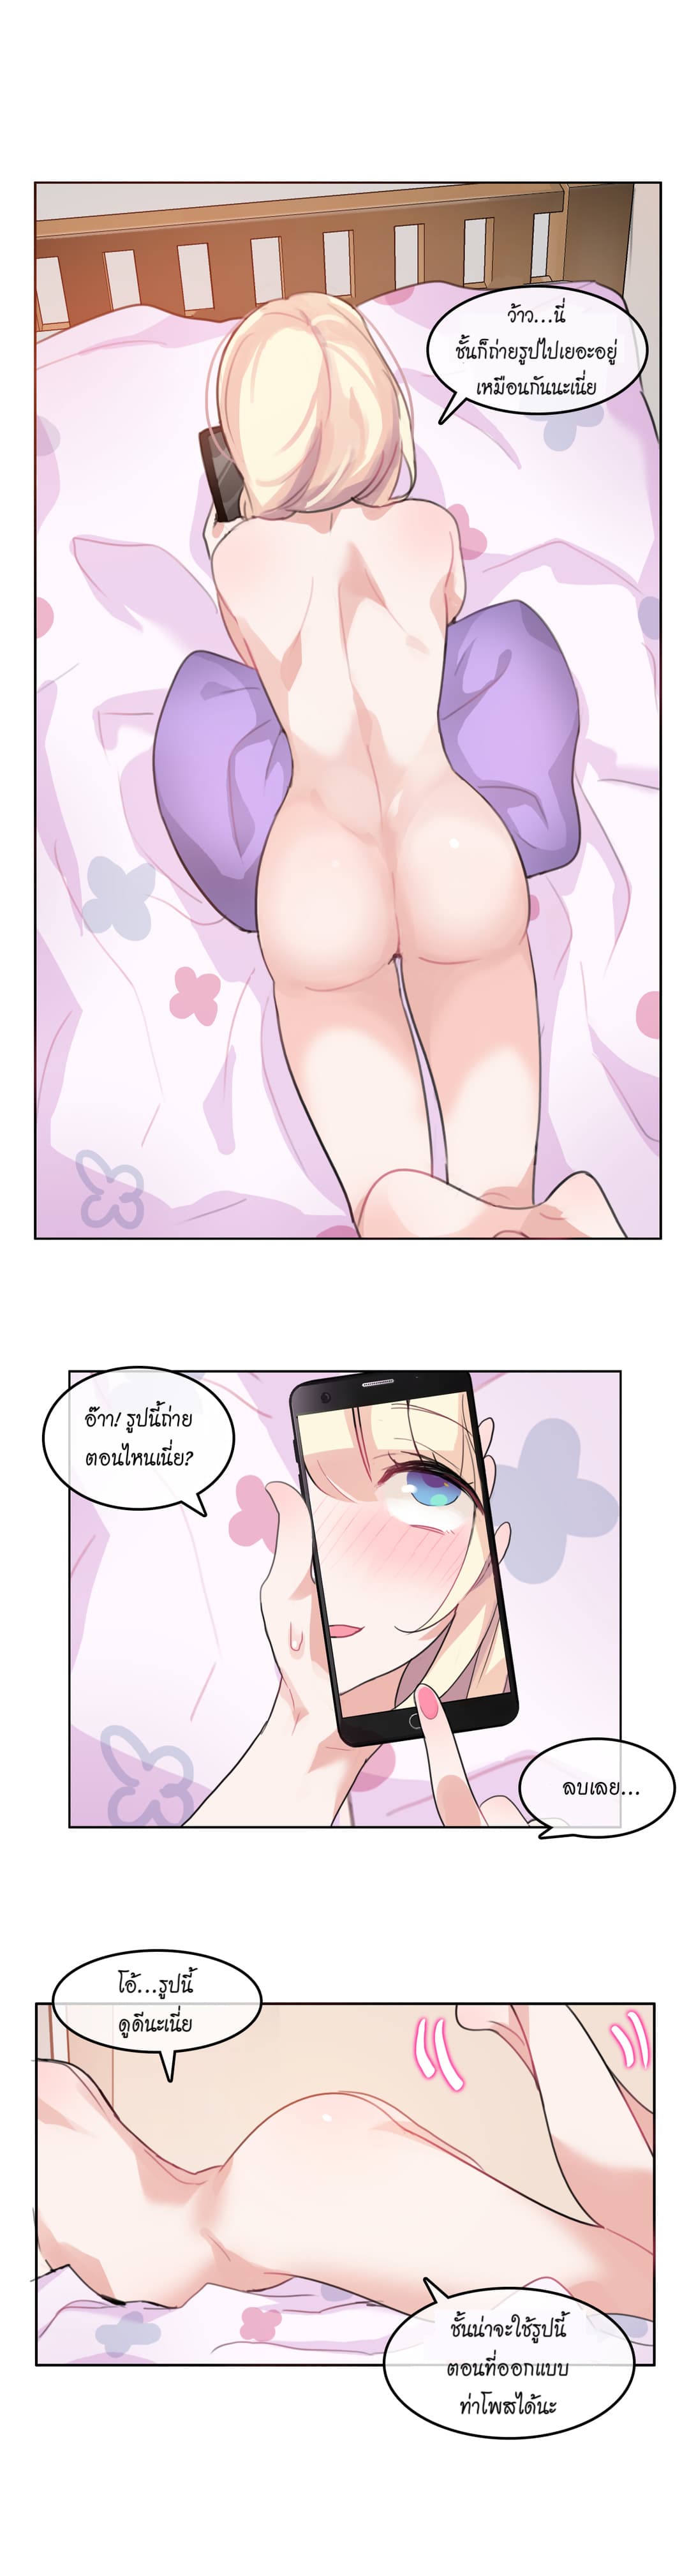 A Pervert’s Daily Life 7 (6)